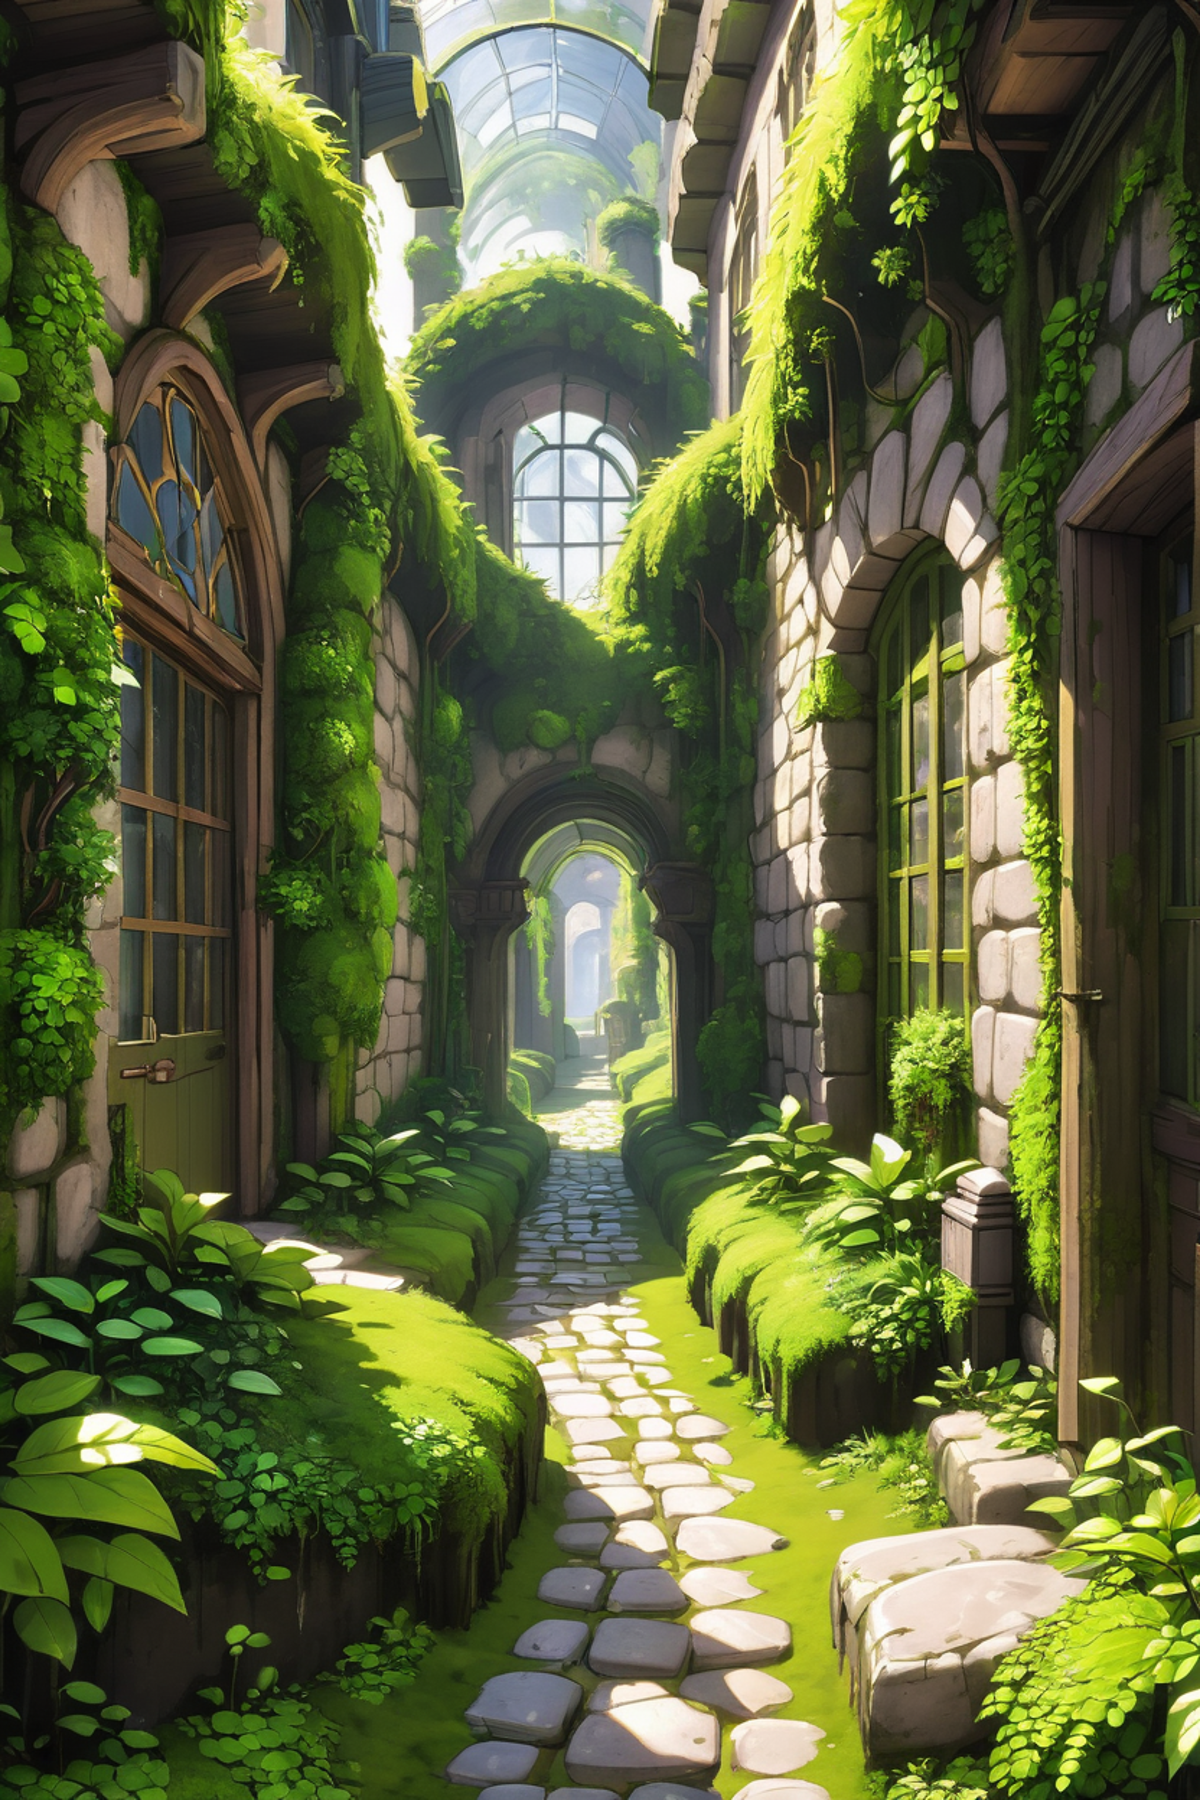 An Artistic Illustration of a Pathway Lined with Greenery and Ivy